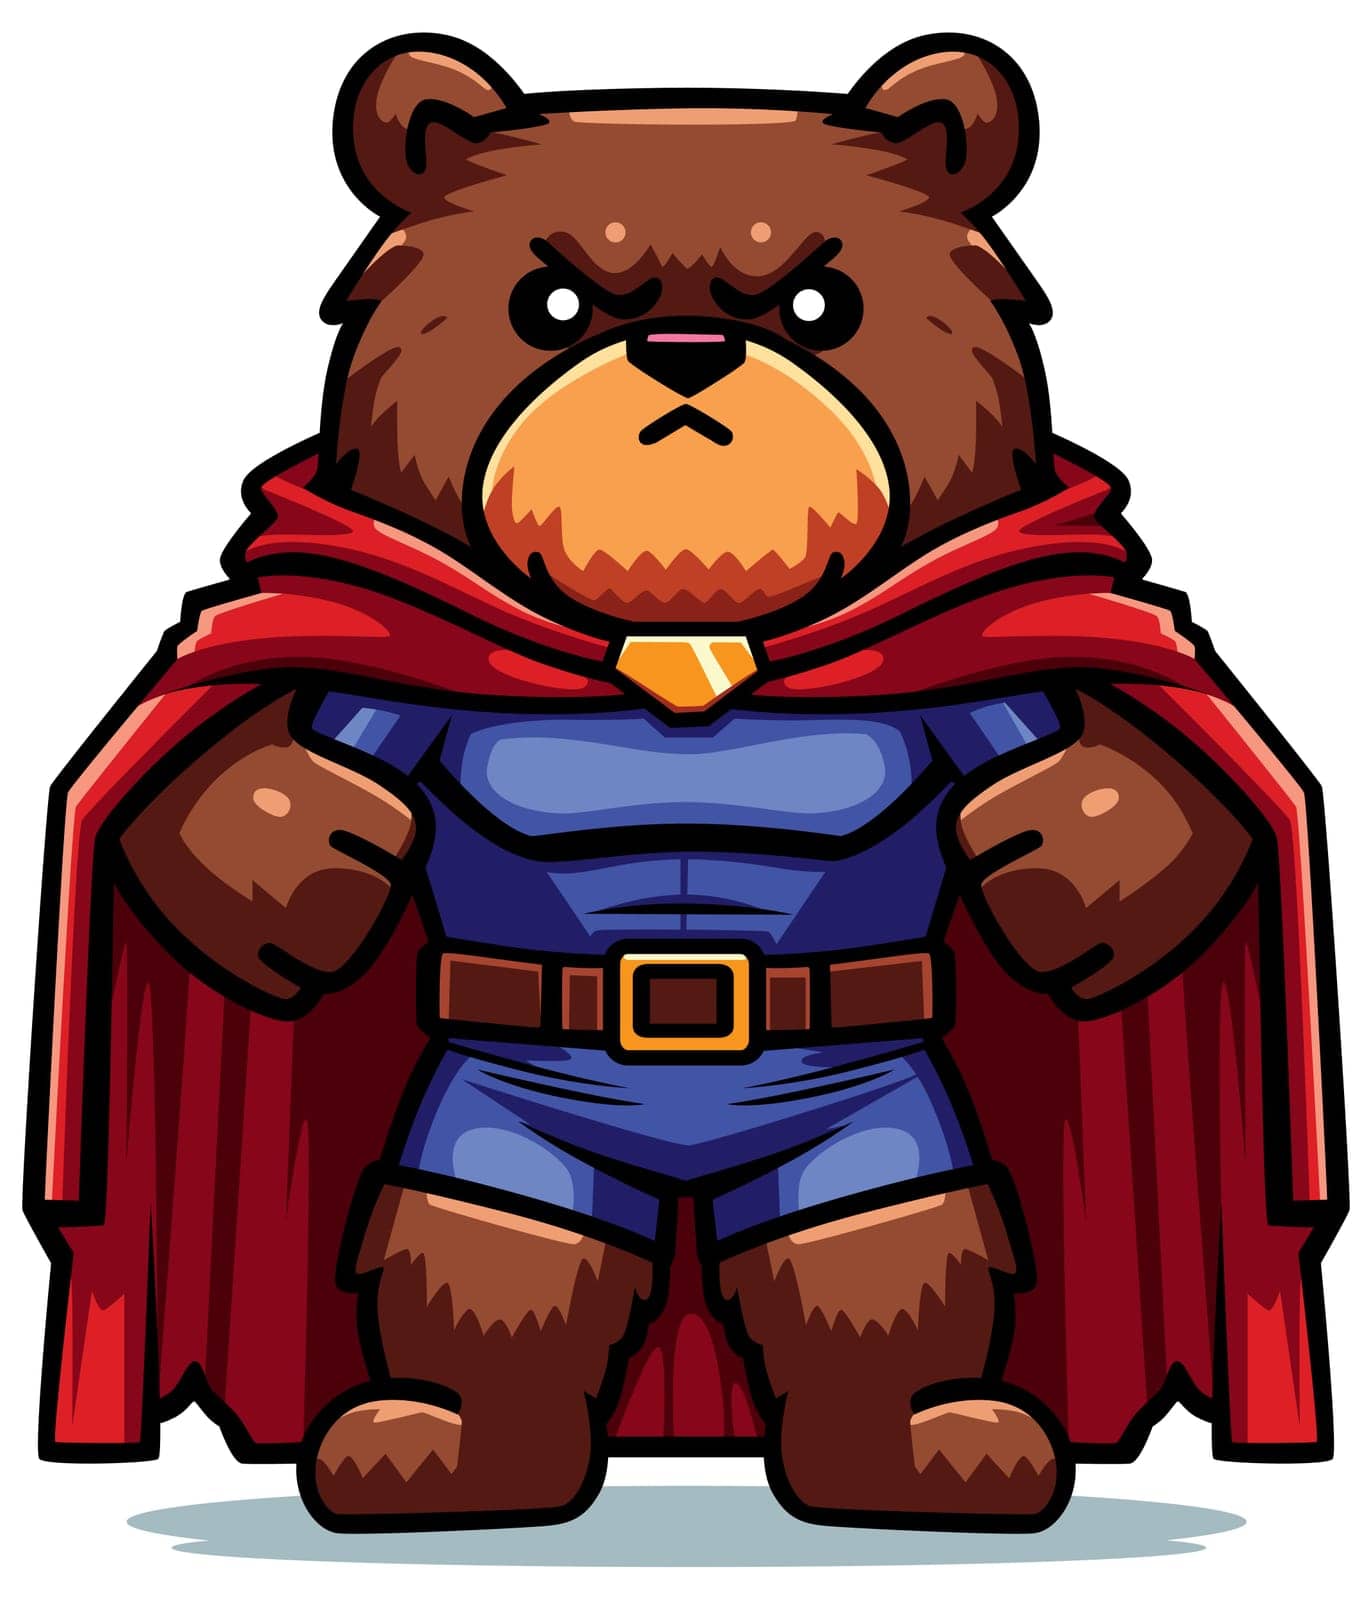 Stylized bear dressed as a superhero, complete with a red cape and confident stance.